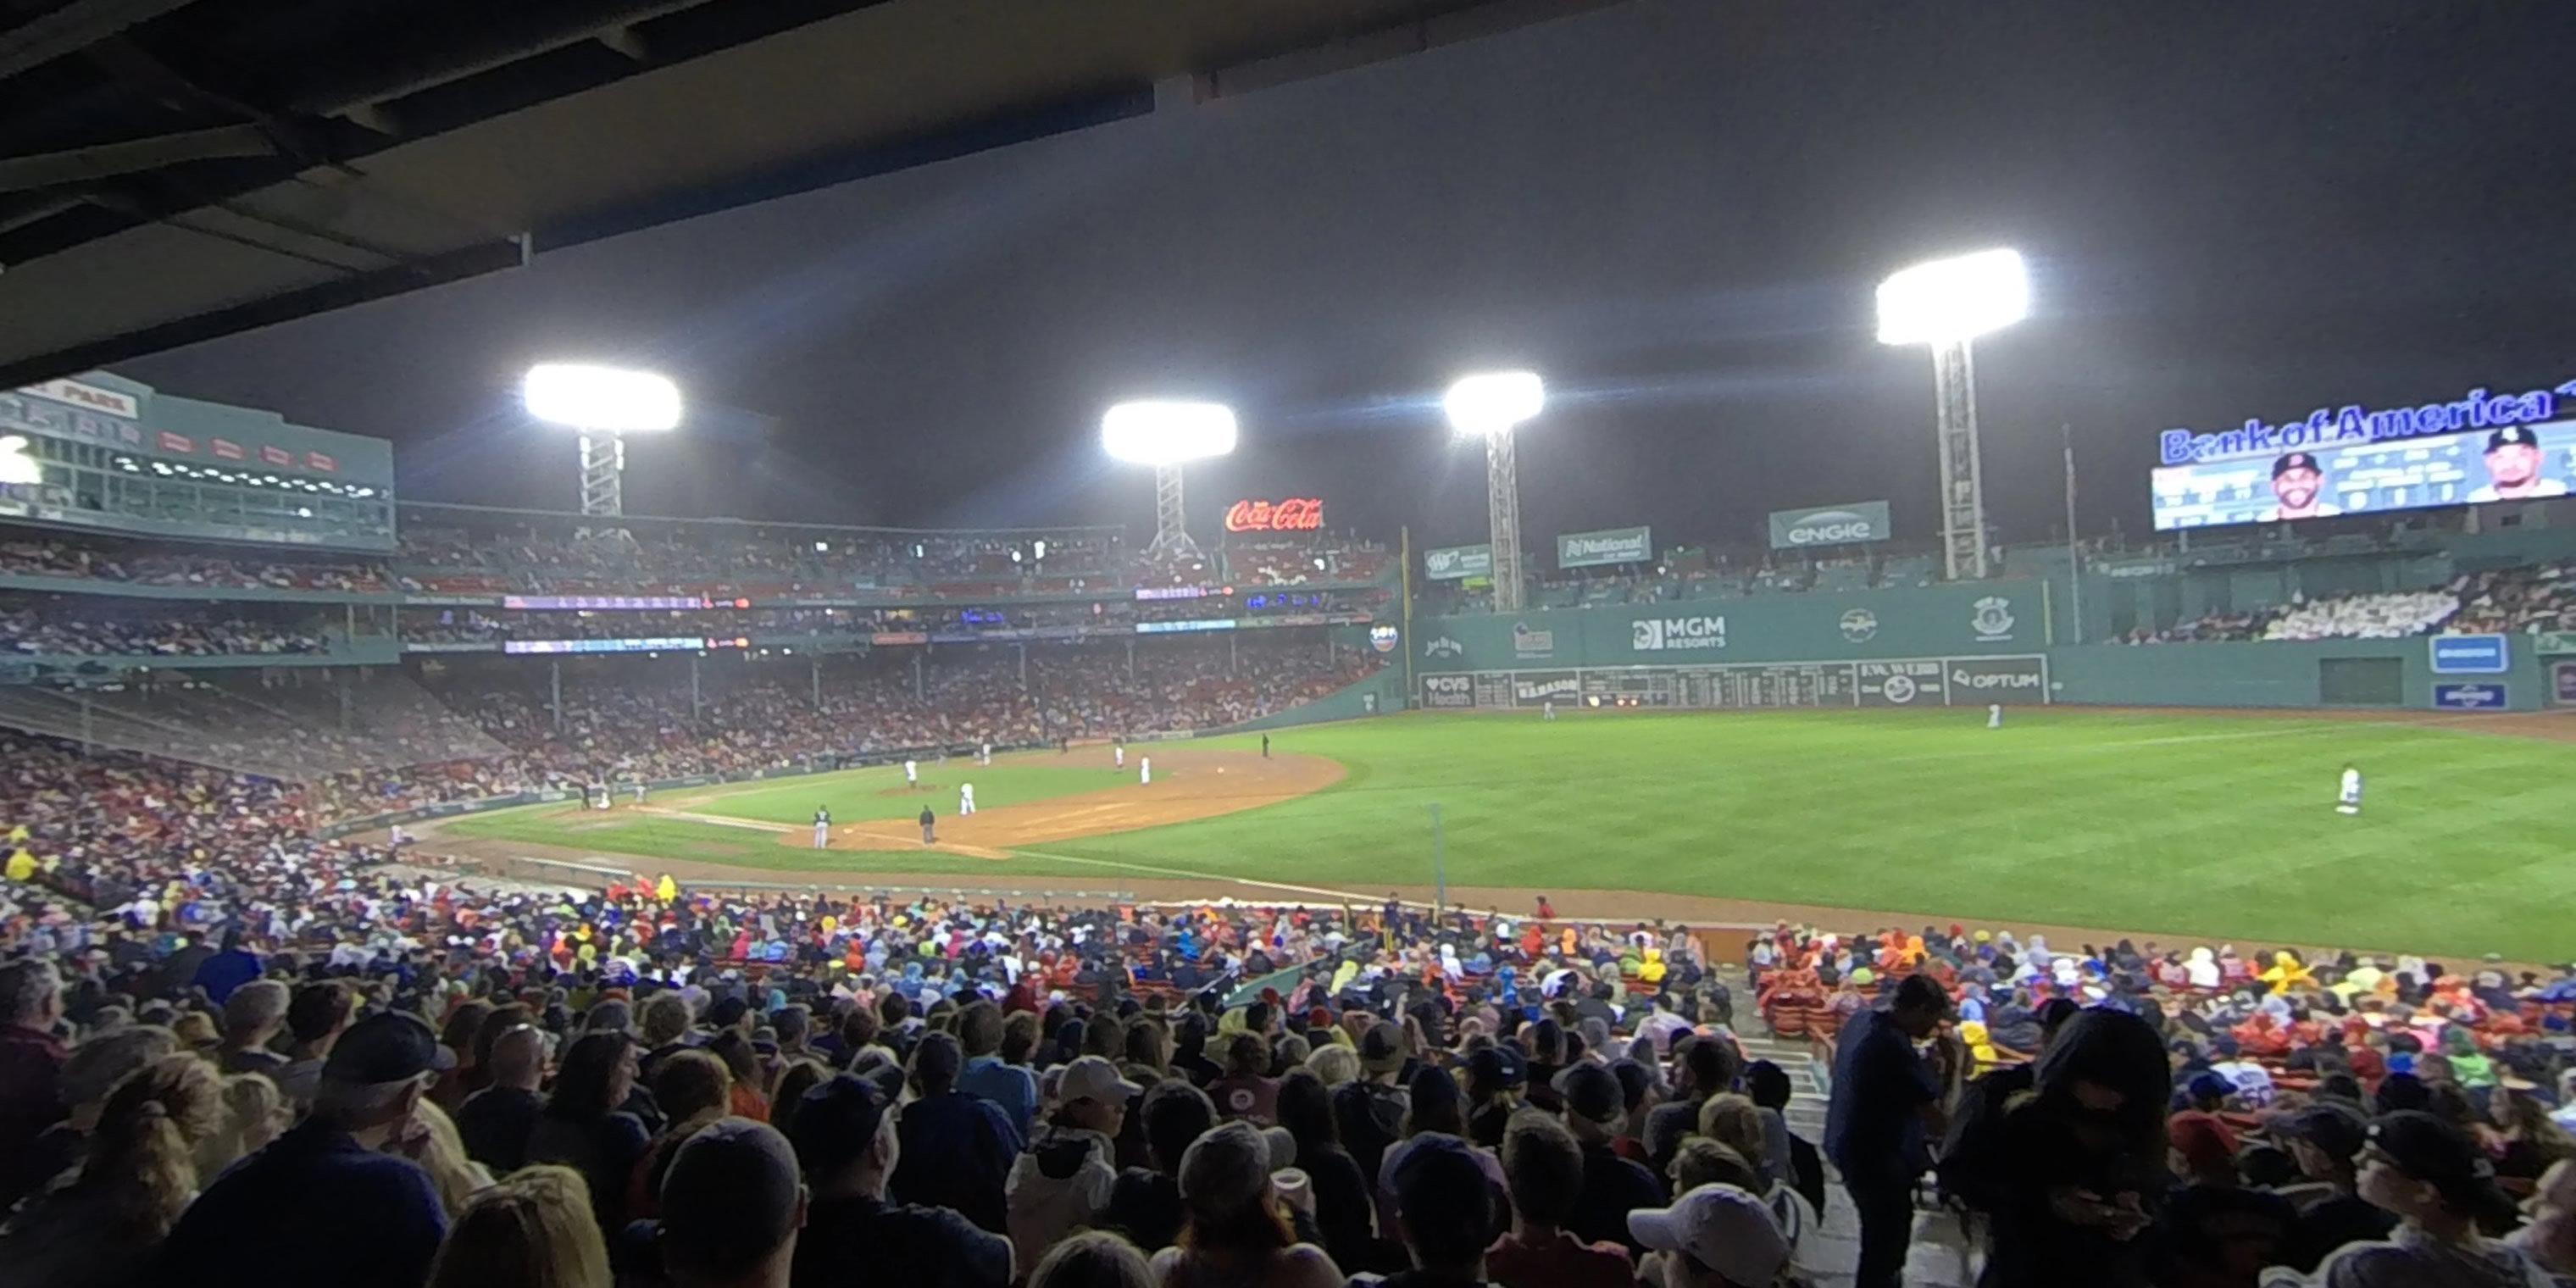 grandstand 9 panoramic seat view  for baseball - fenway park